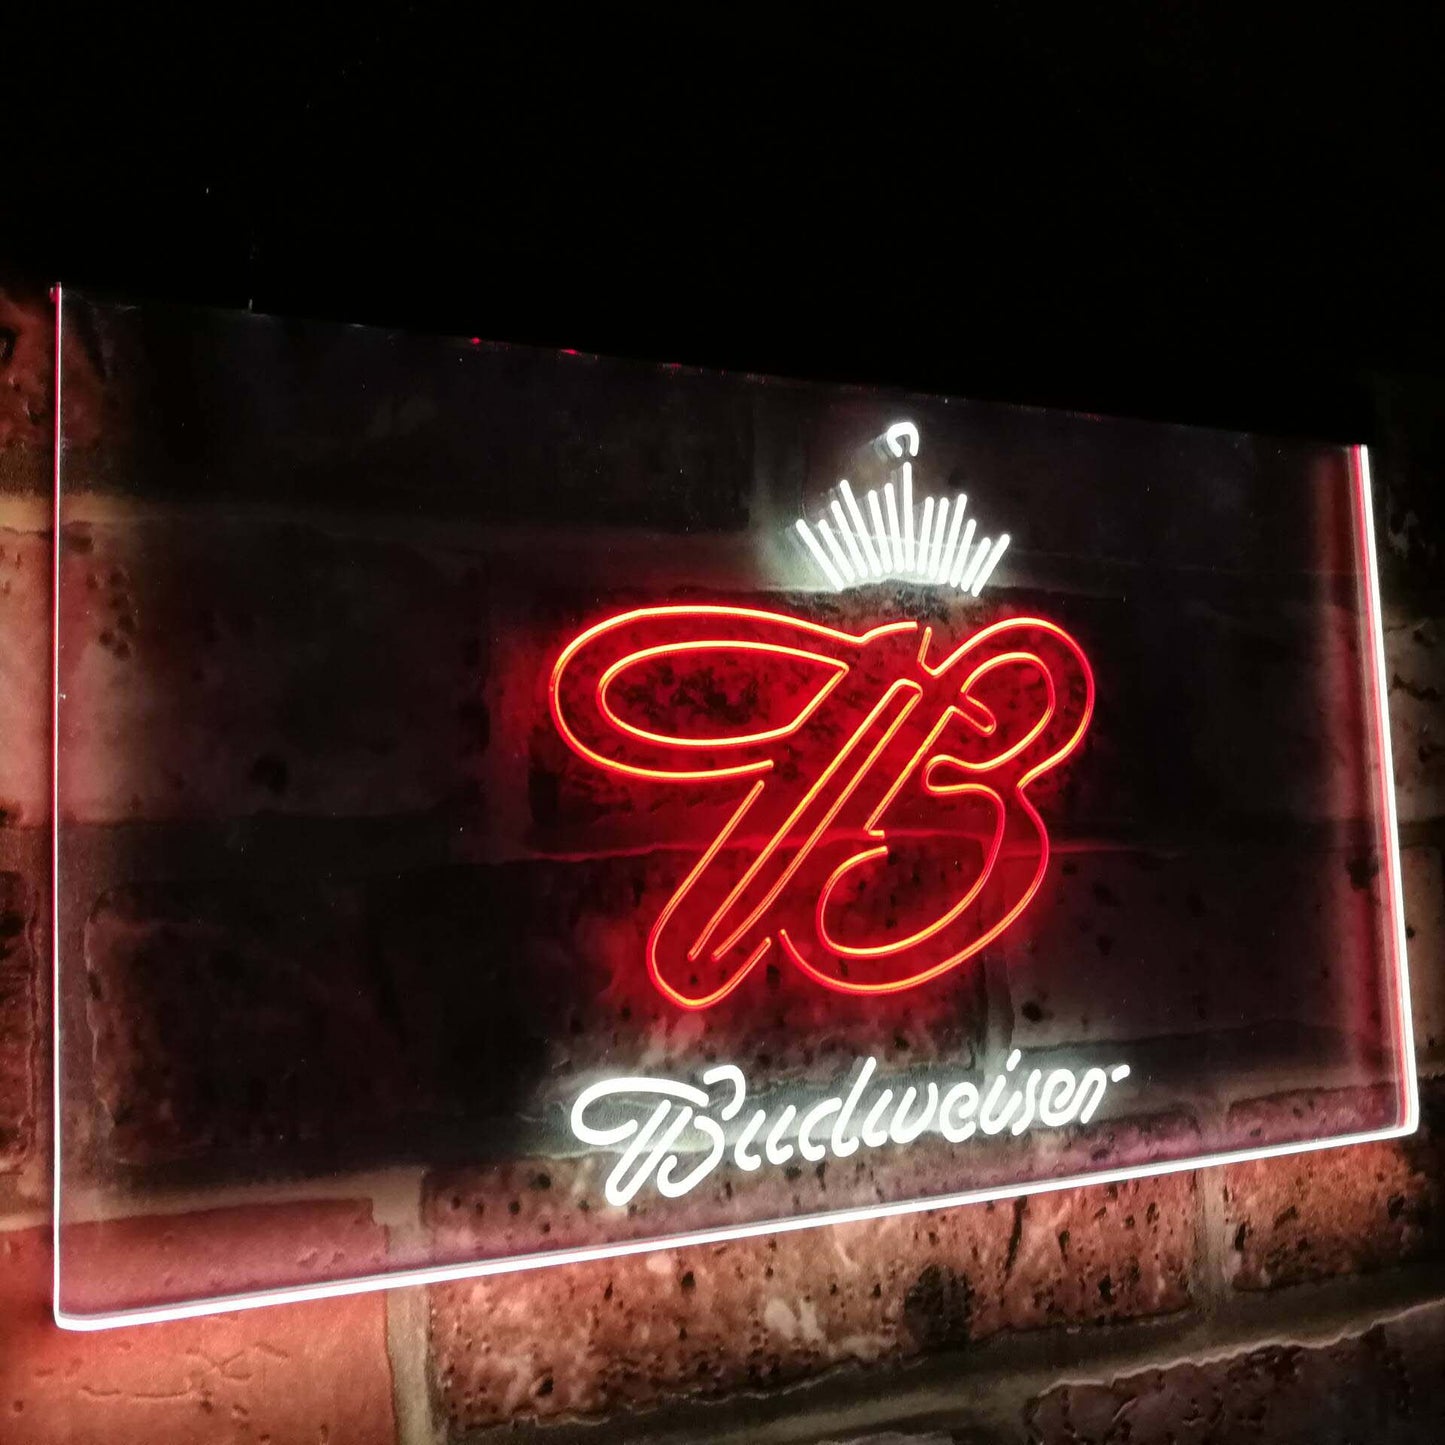 Budweiser Crown King  Bar Decoration Gift Dual Color Led Neon Light Signs st6-a2006 by Woody Signs Co. - Handmade Crafted Unique Wooden Creative